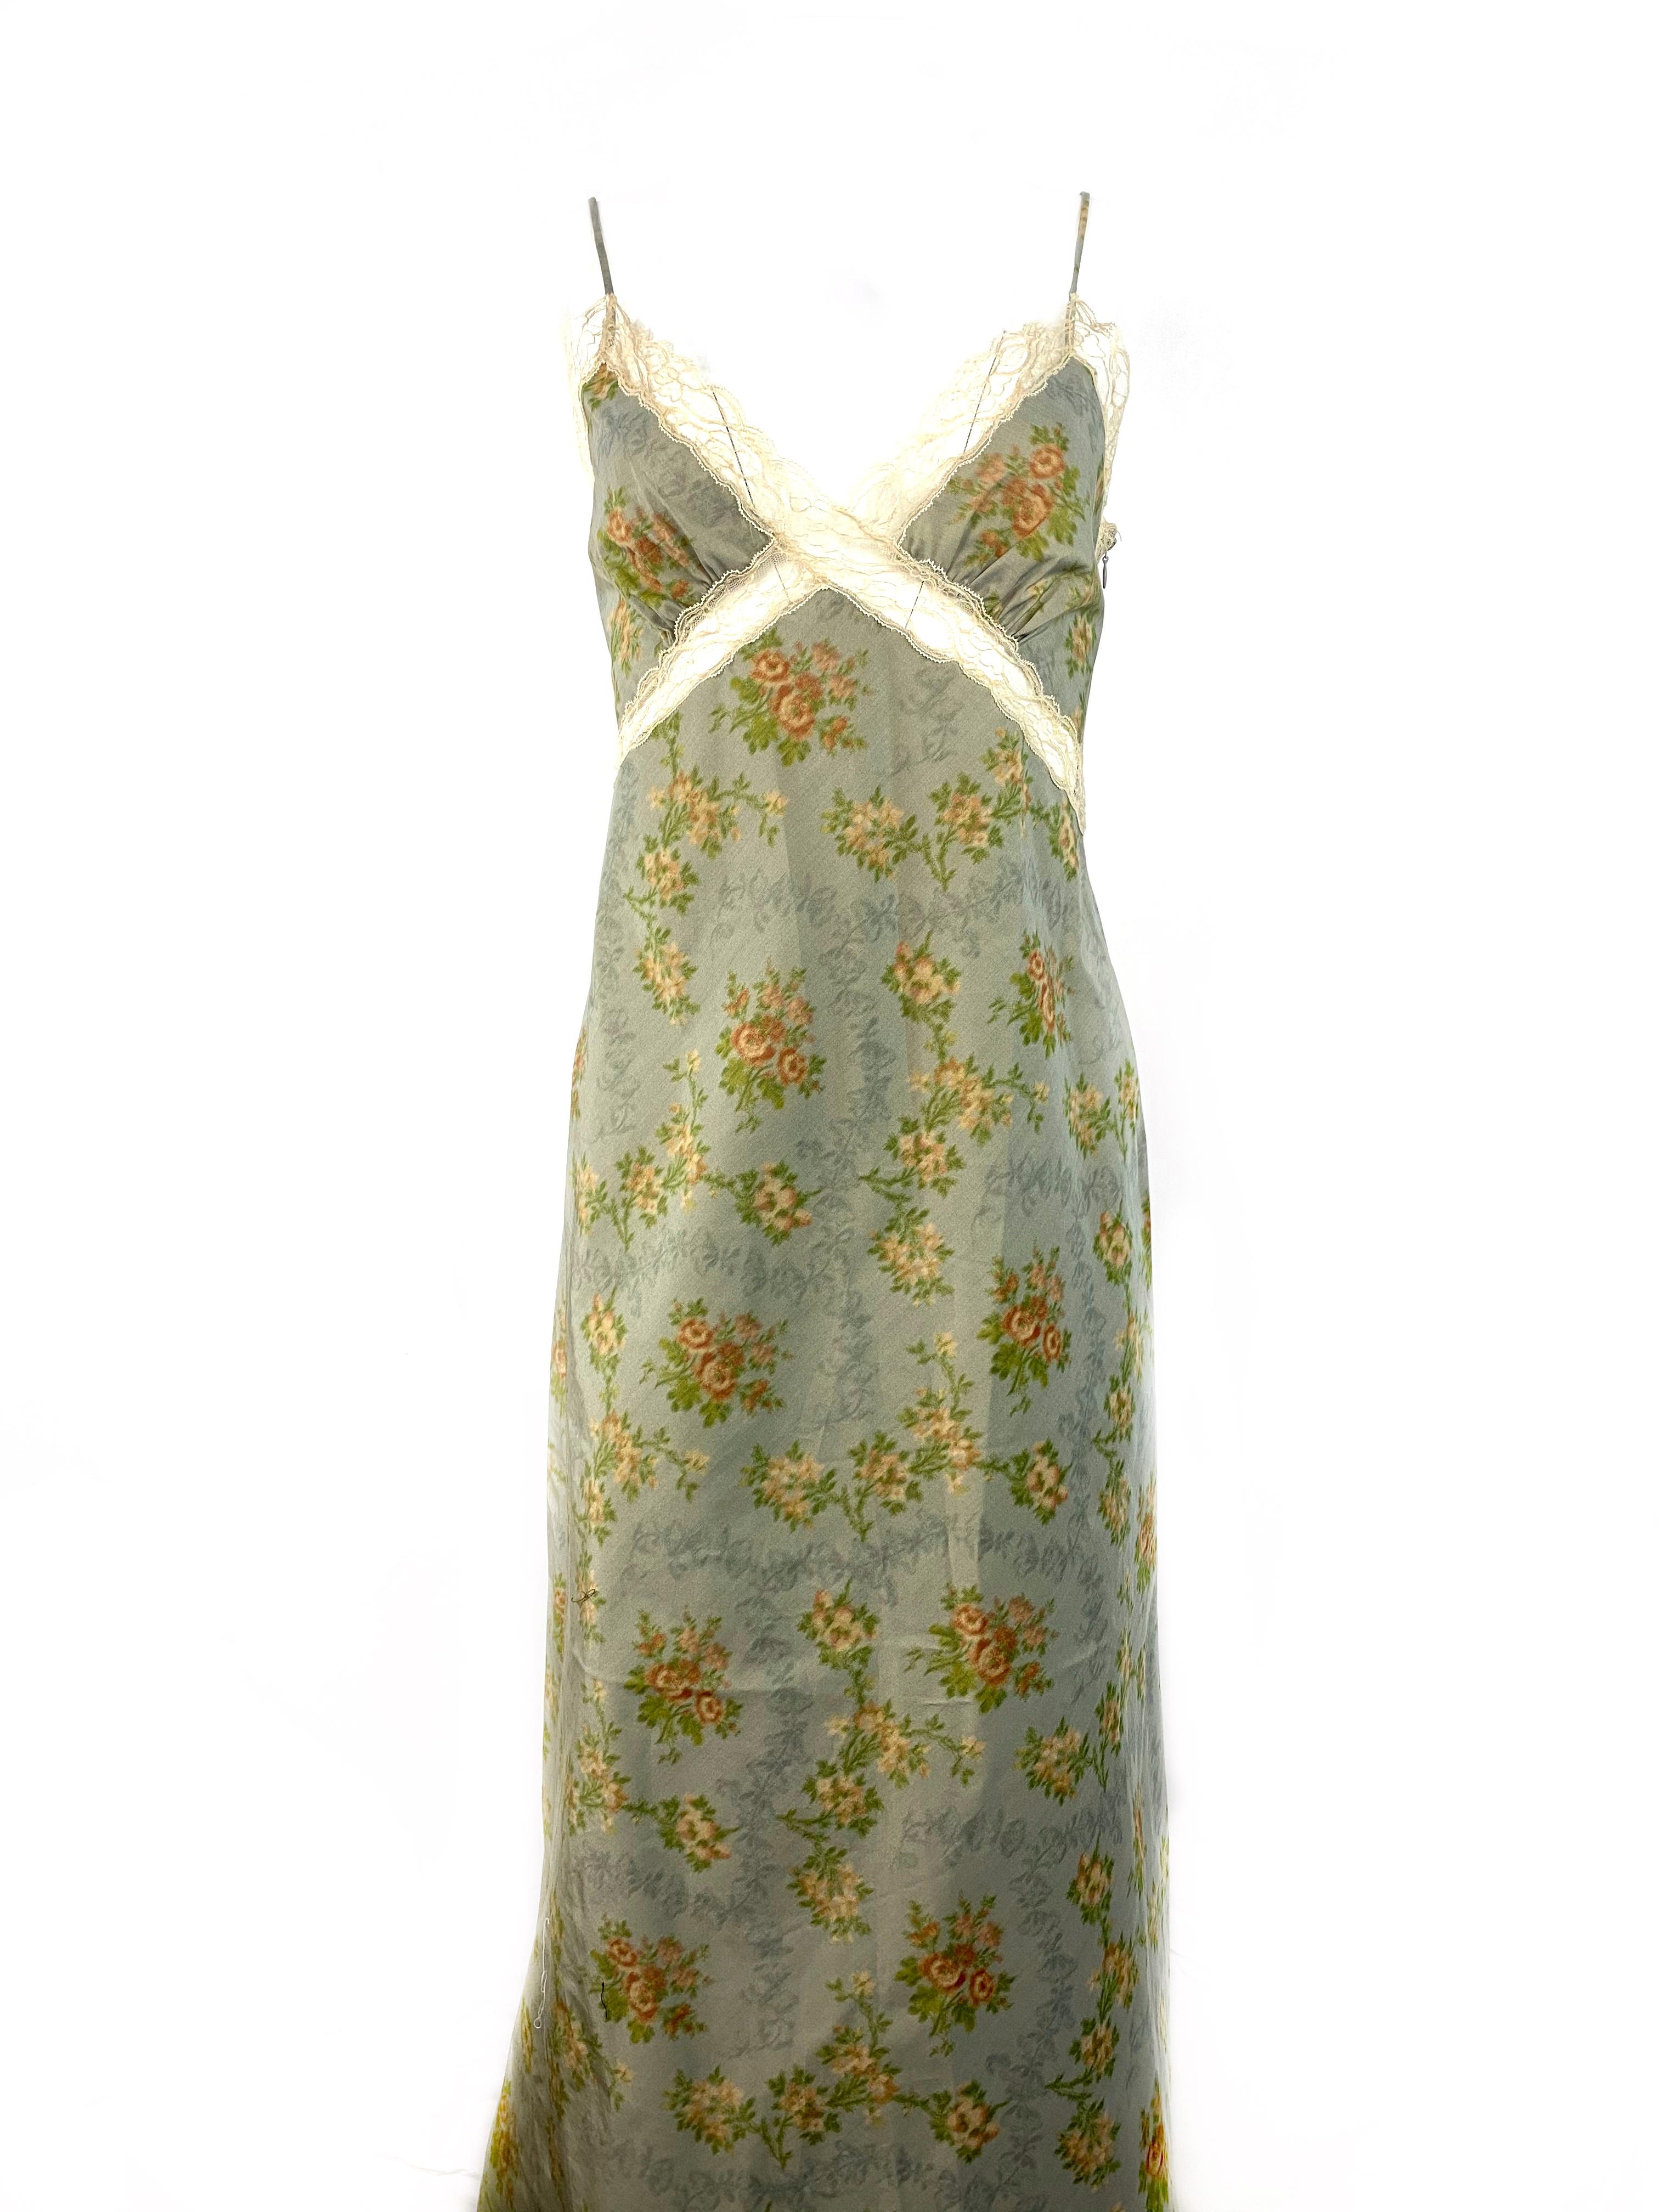 Product details:
Featuring grey maxi dress with floral print, ivory floral lace detail, spaghetti straps and side zip and hook closure.
Floor length with the ivory floral lace trimming on the bottom.
Made in Italy.